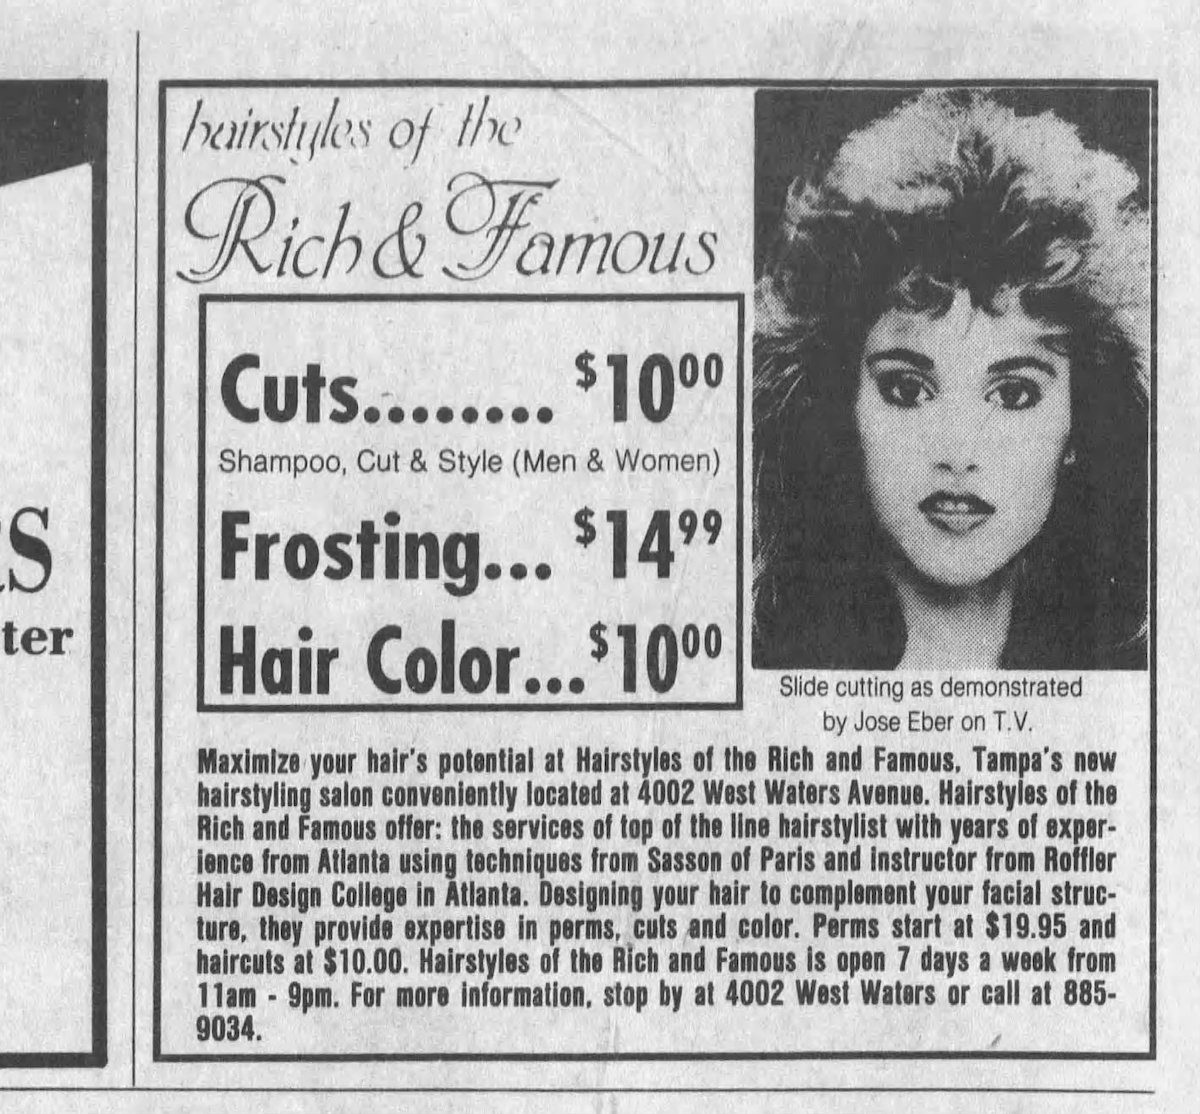 Snapshots from a Tampa Florida Hair salon in the 1980s